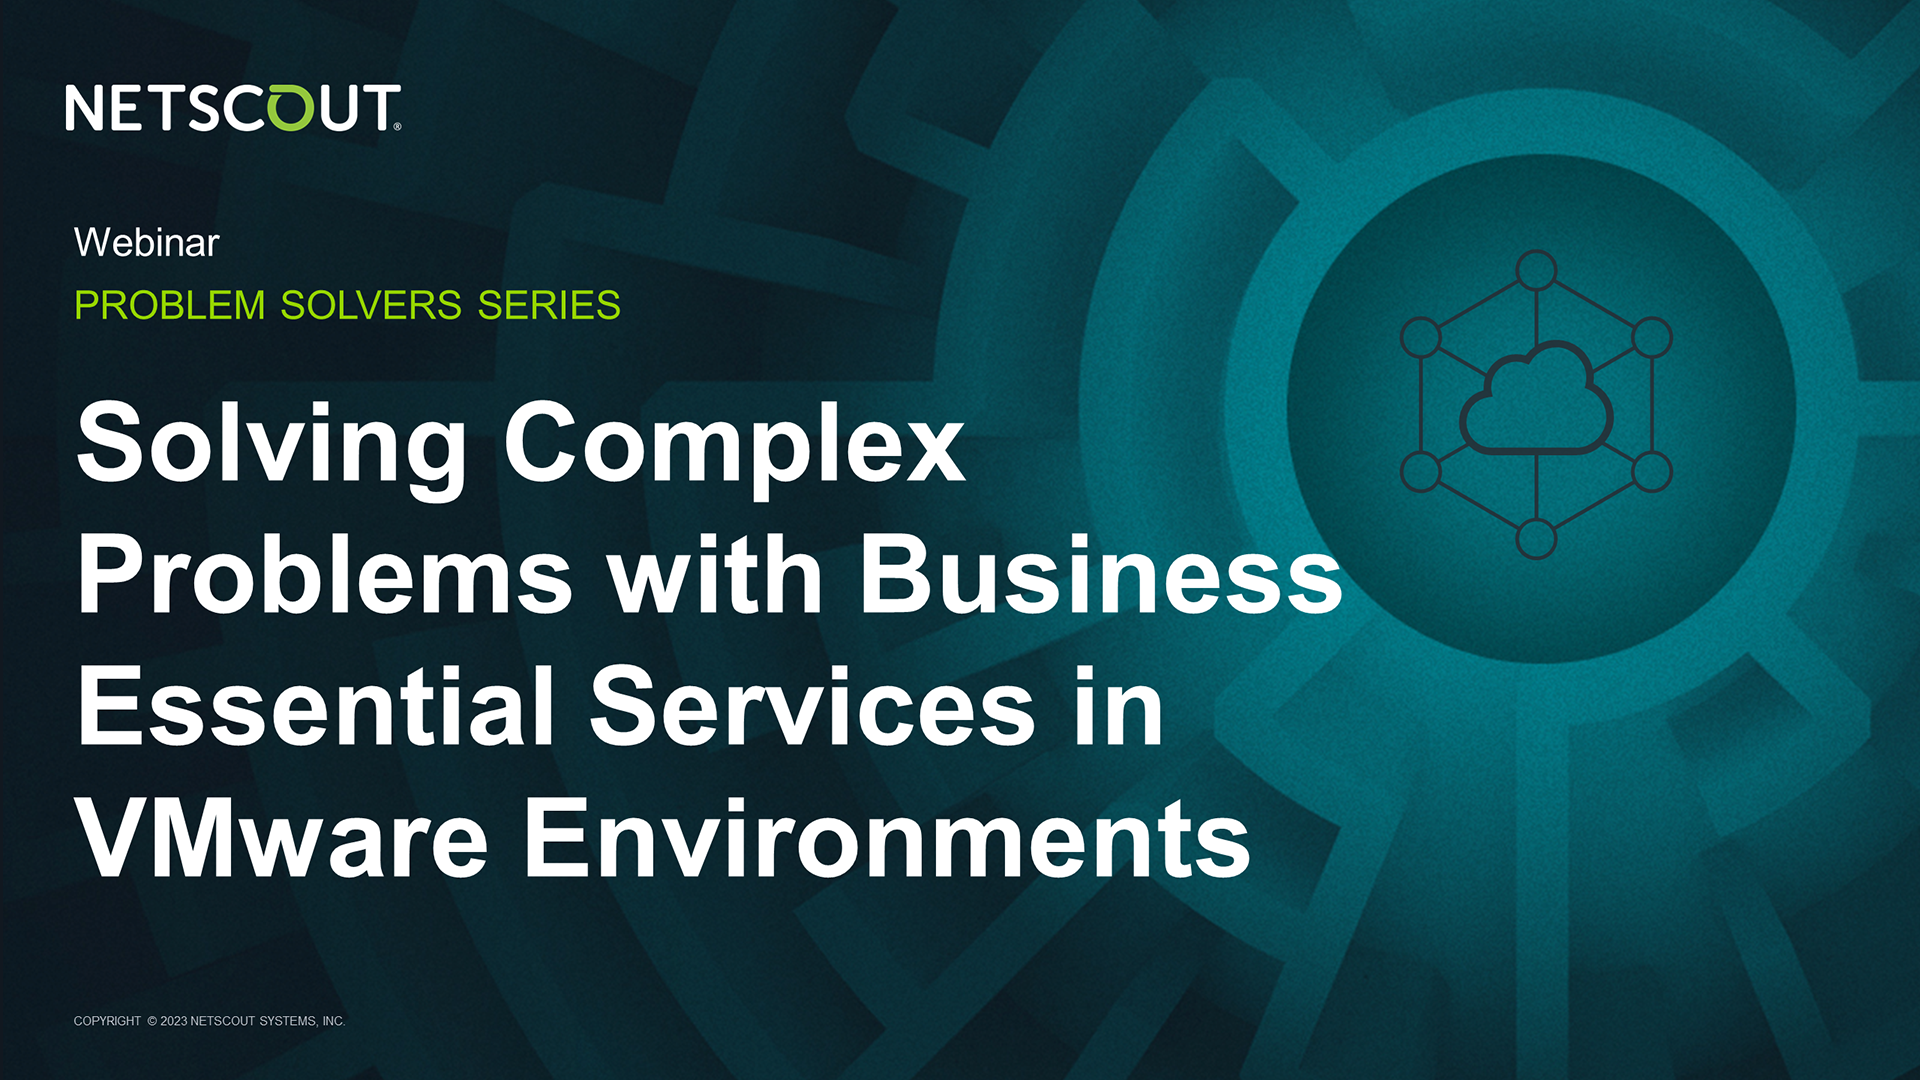 Solving Complex Problems with Business Essential Services in VMware Environments